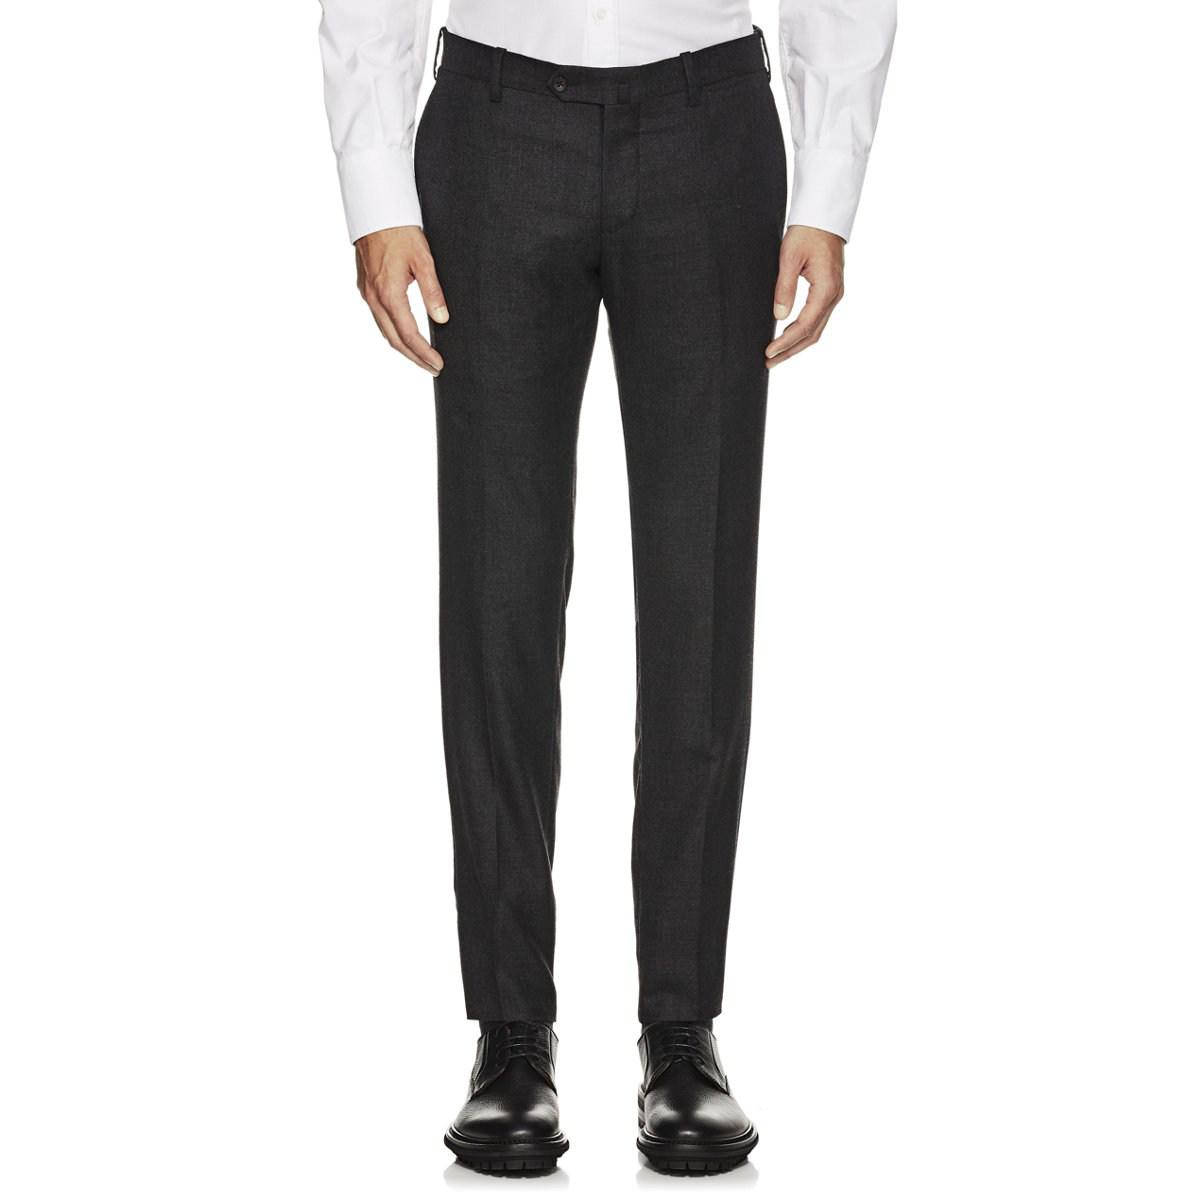 Marco Pescarolo Cashmere Twill Trousers in Charcoal (Gray) for Men - Lyst